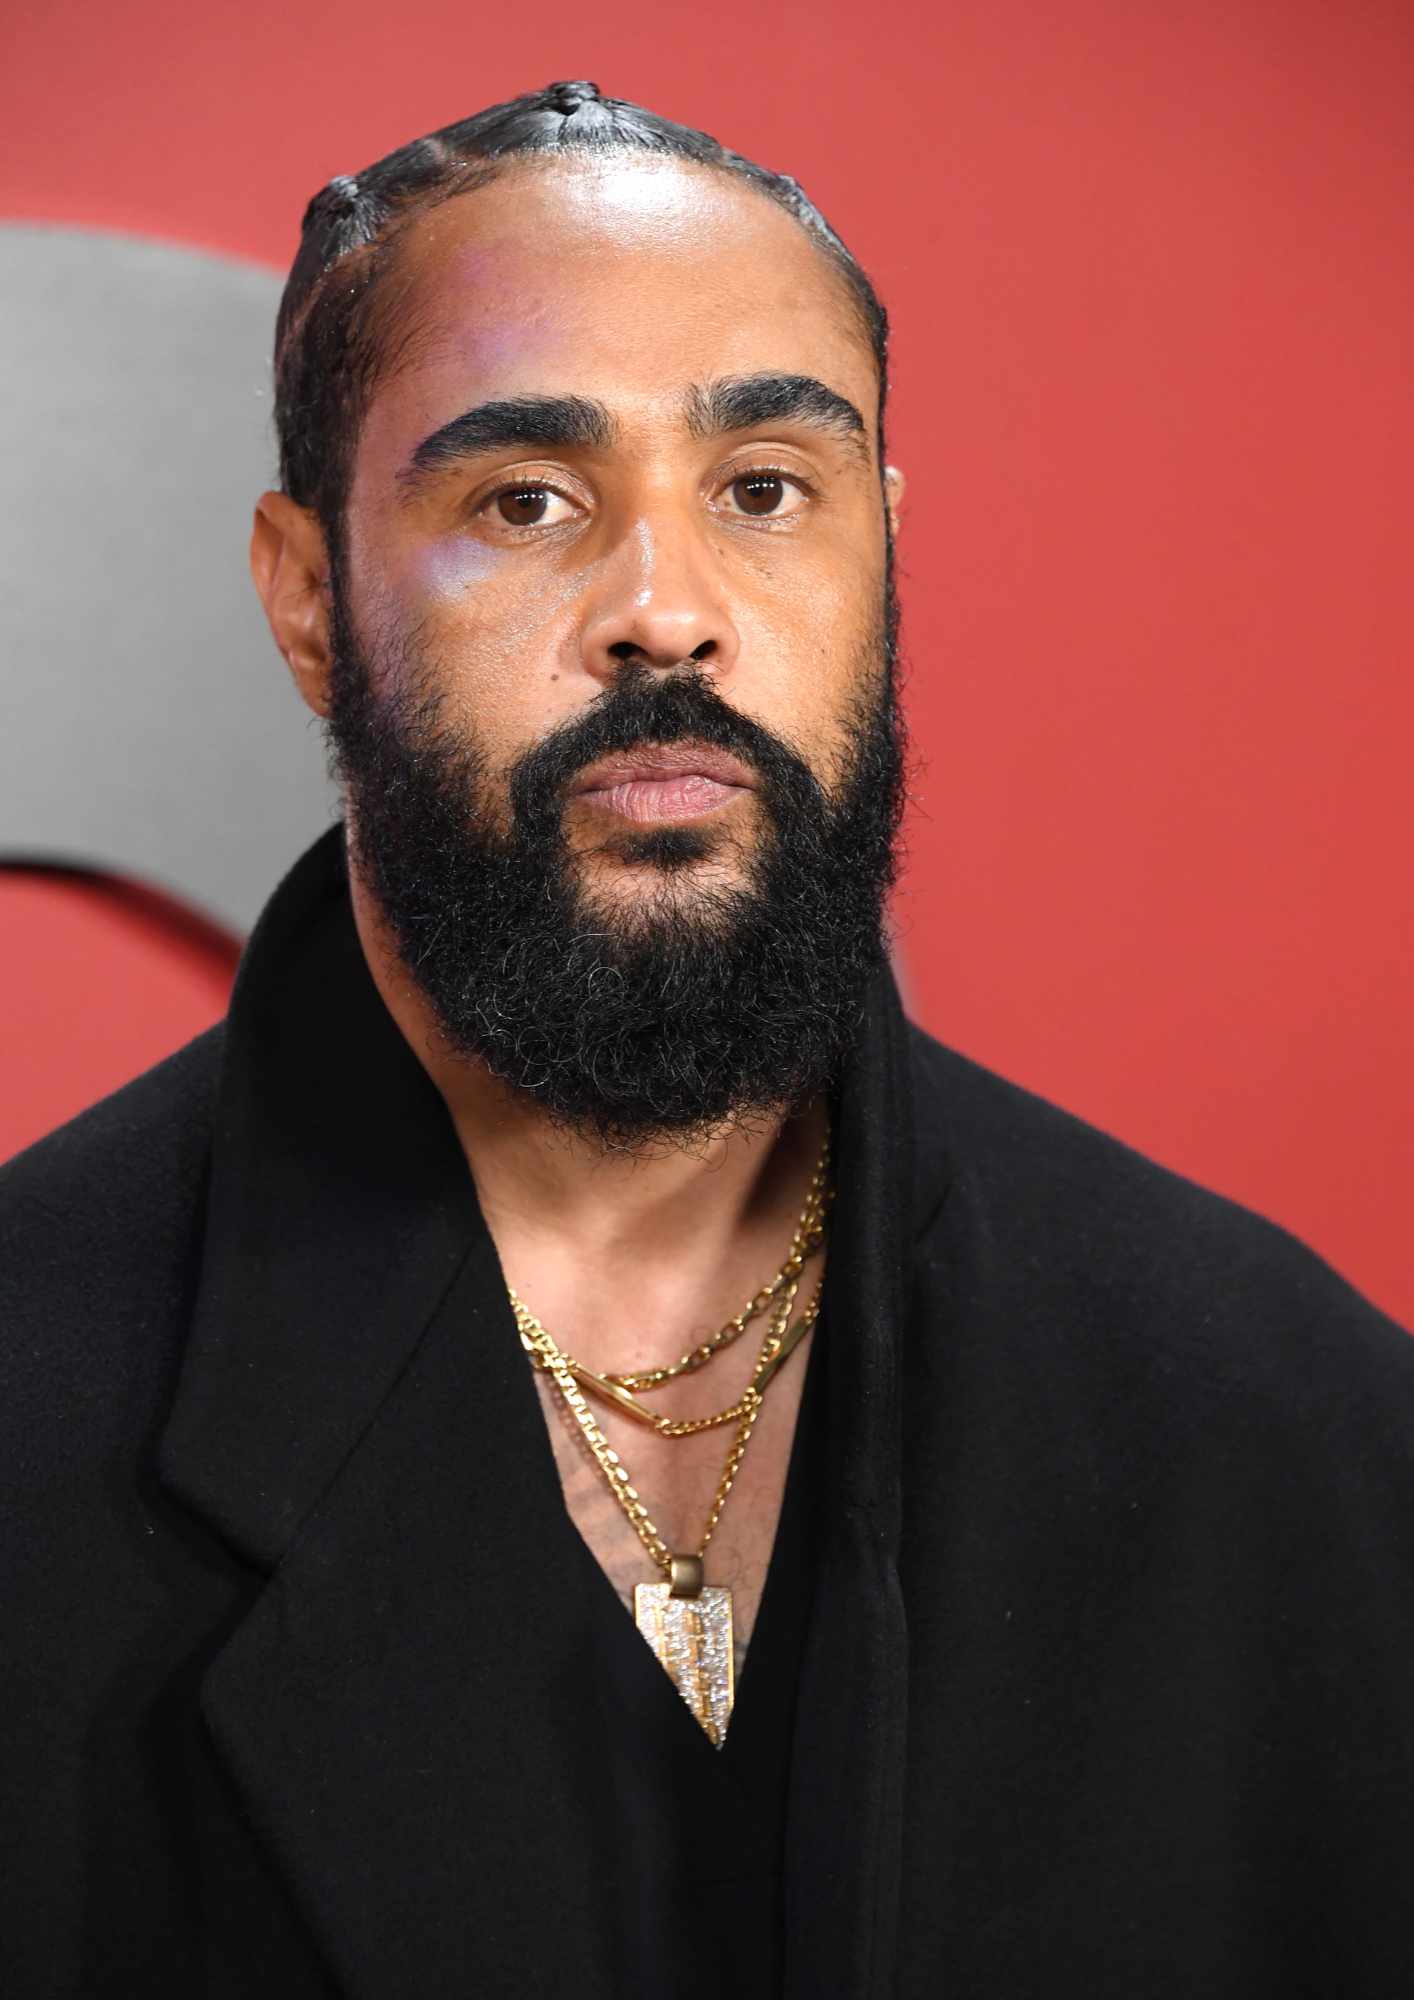 Fear of God Jerry Lorenzo wears a black coat and gold jewelry in front of a red backdrop